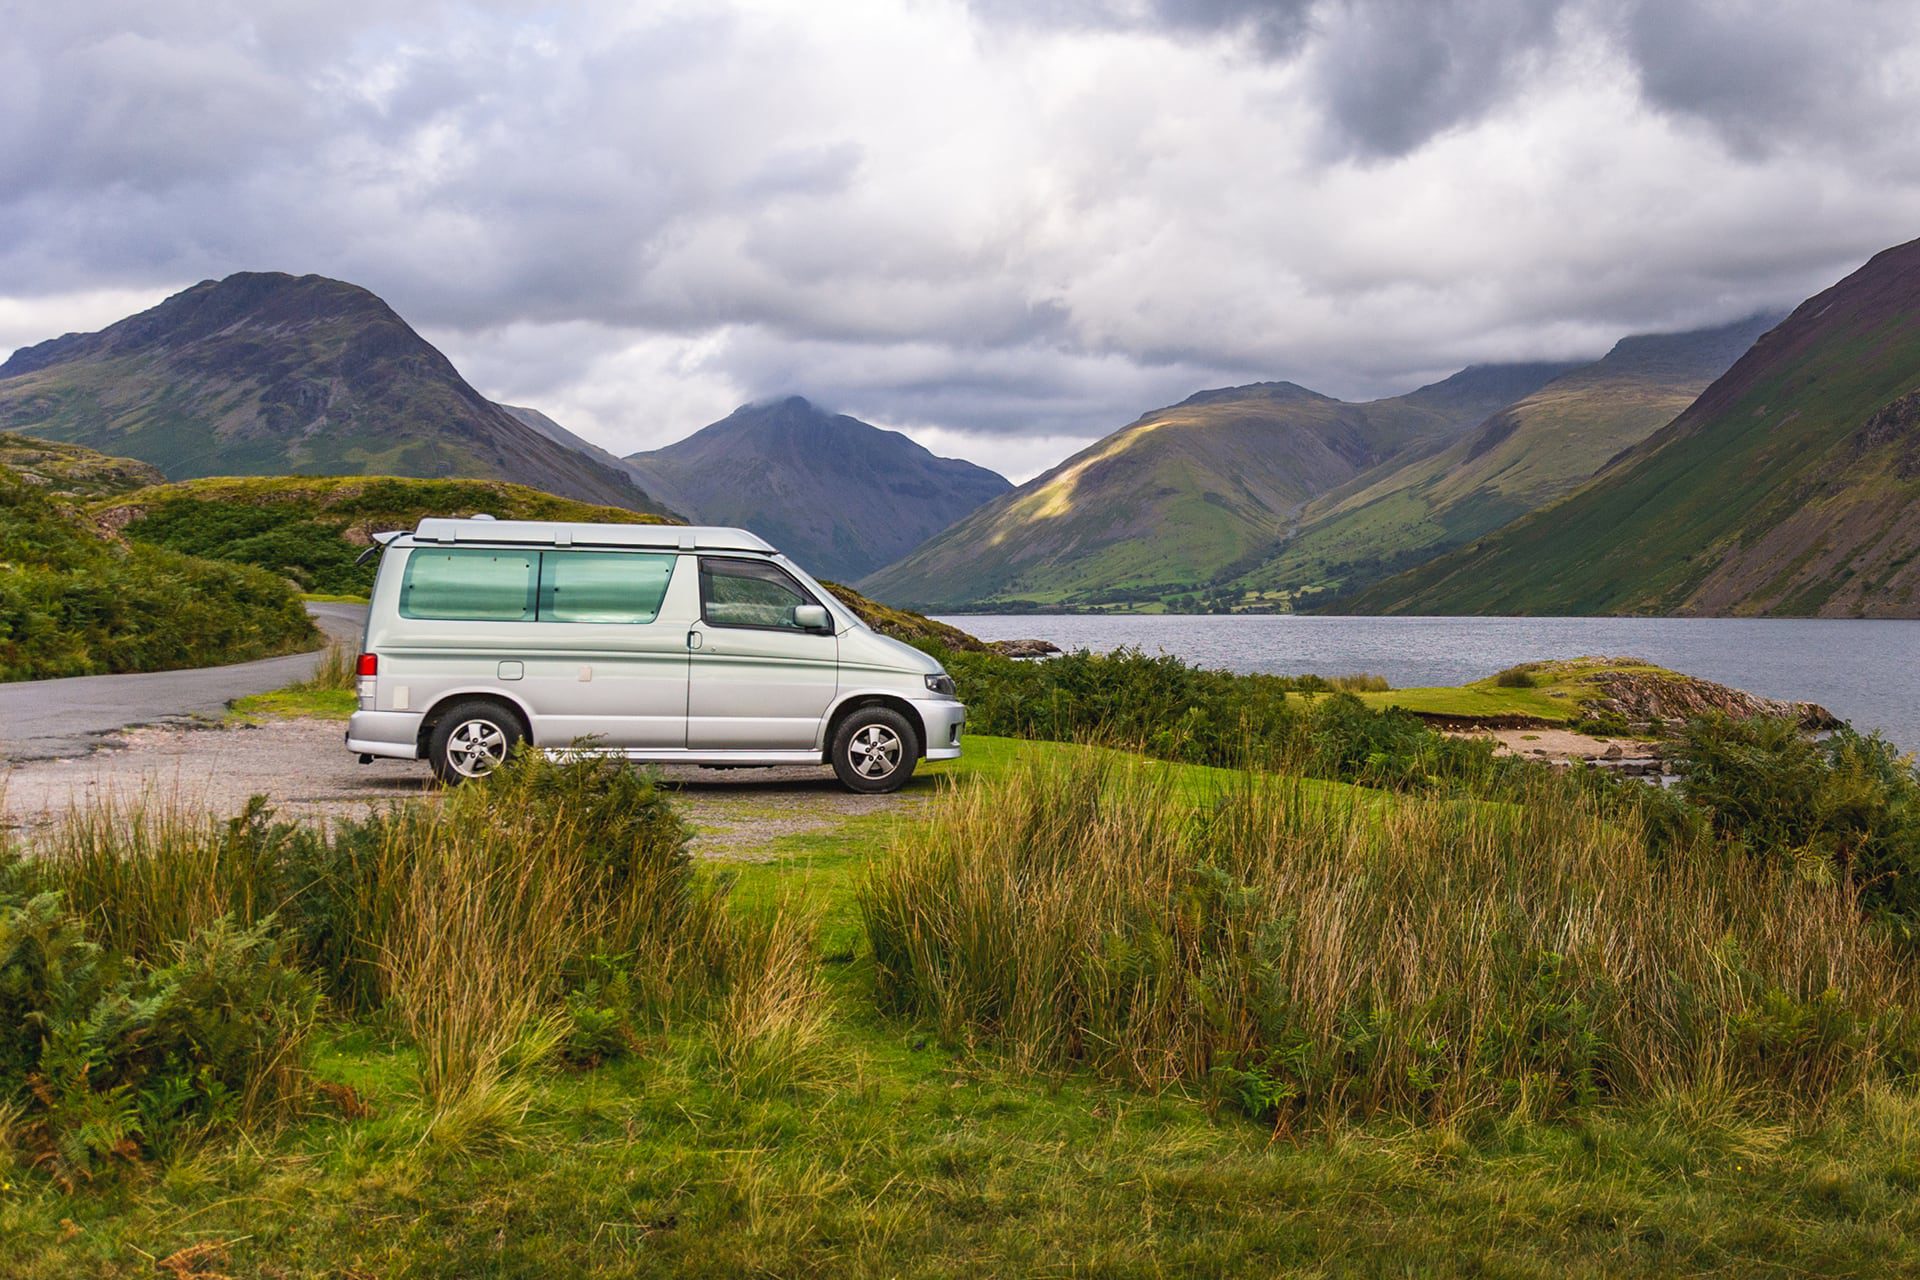 Camper van in front of lake and mountains